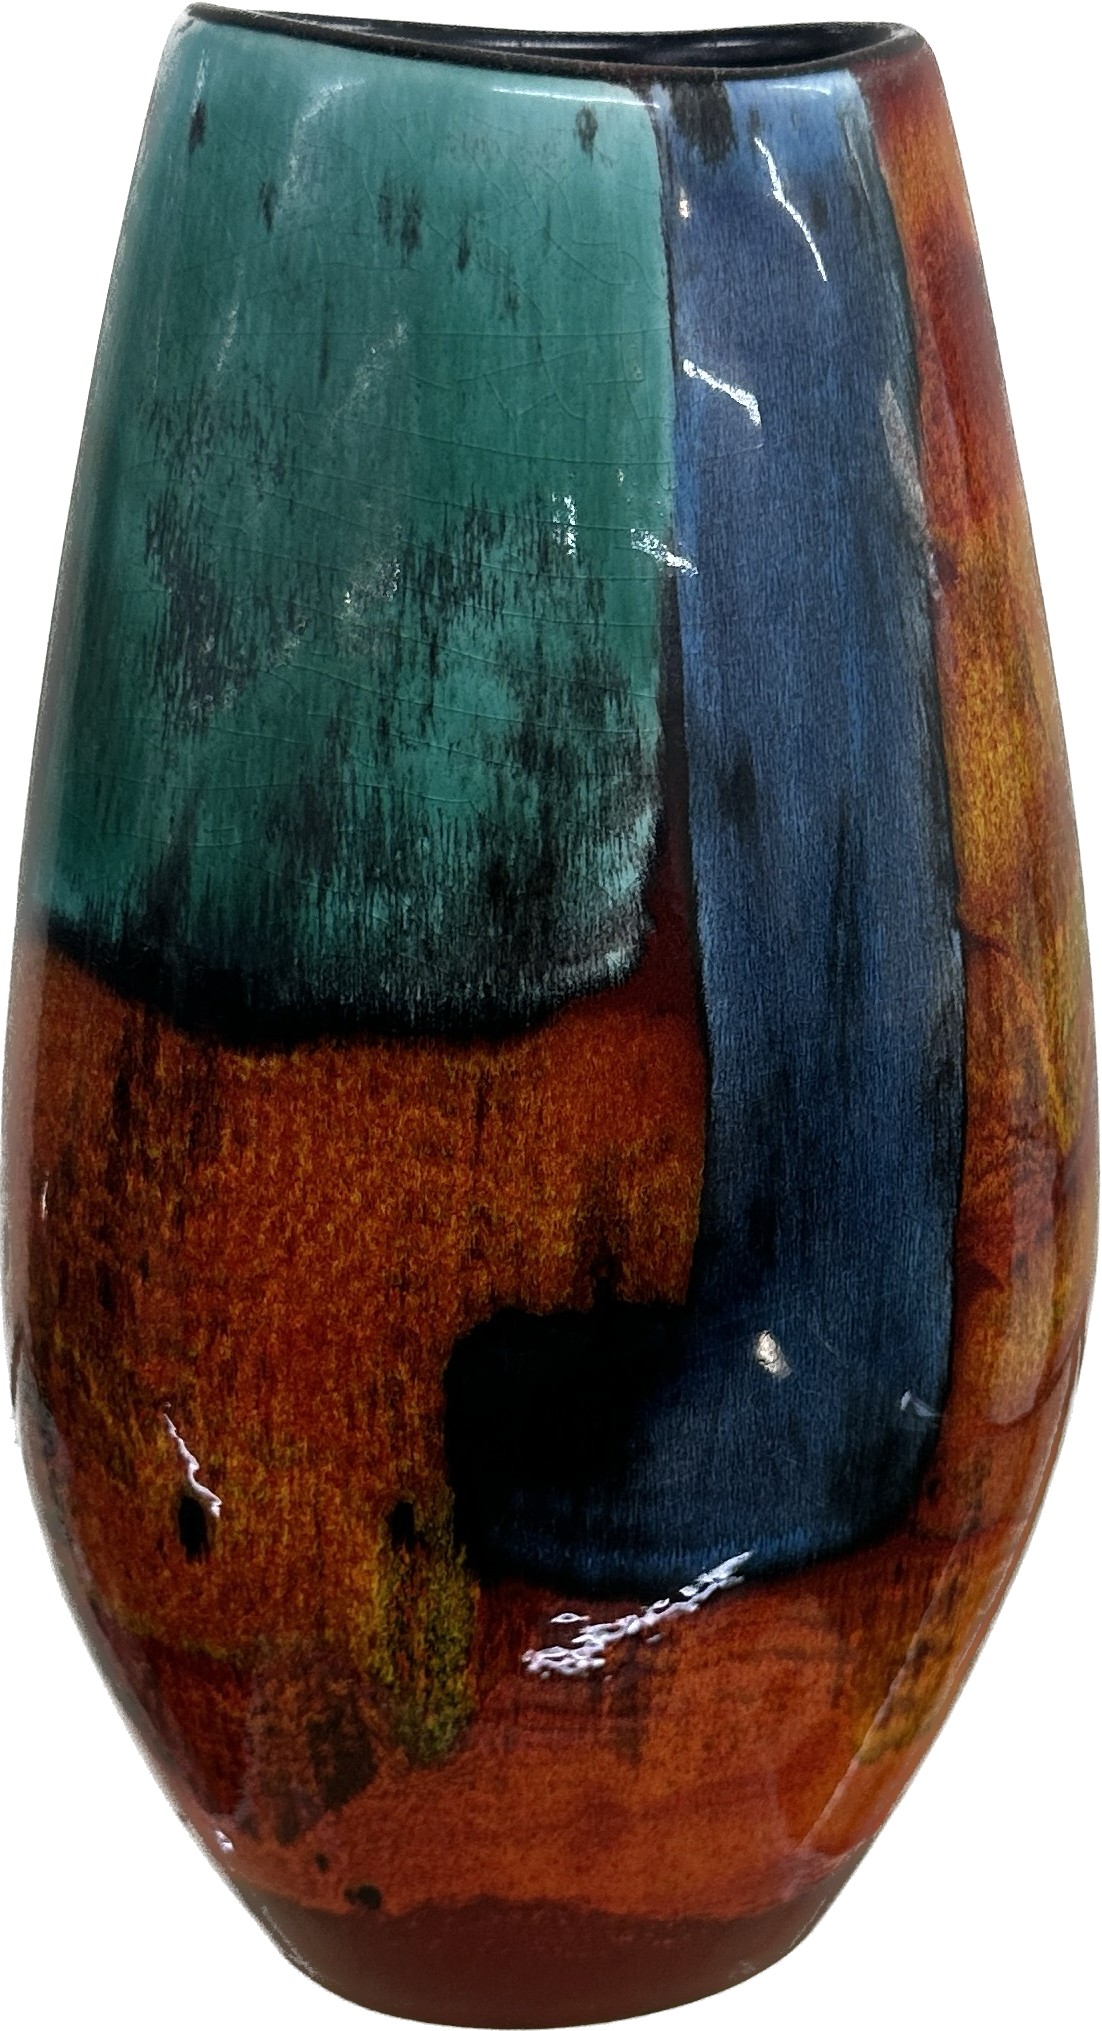 Poole Pottery Graffiti small vase, overall height 26cm, good overall condition - Image 4 of 4